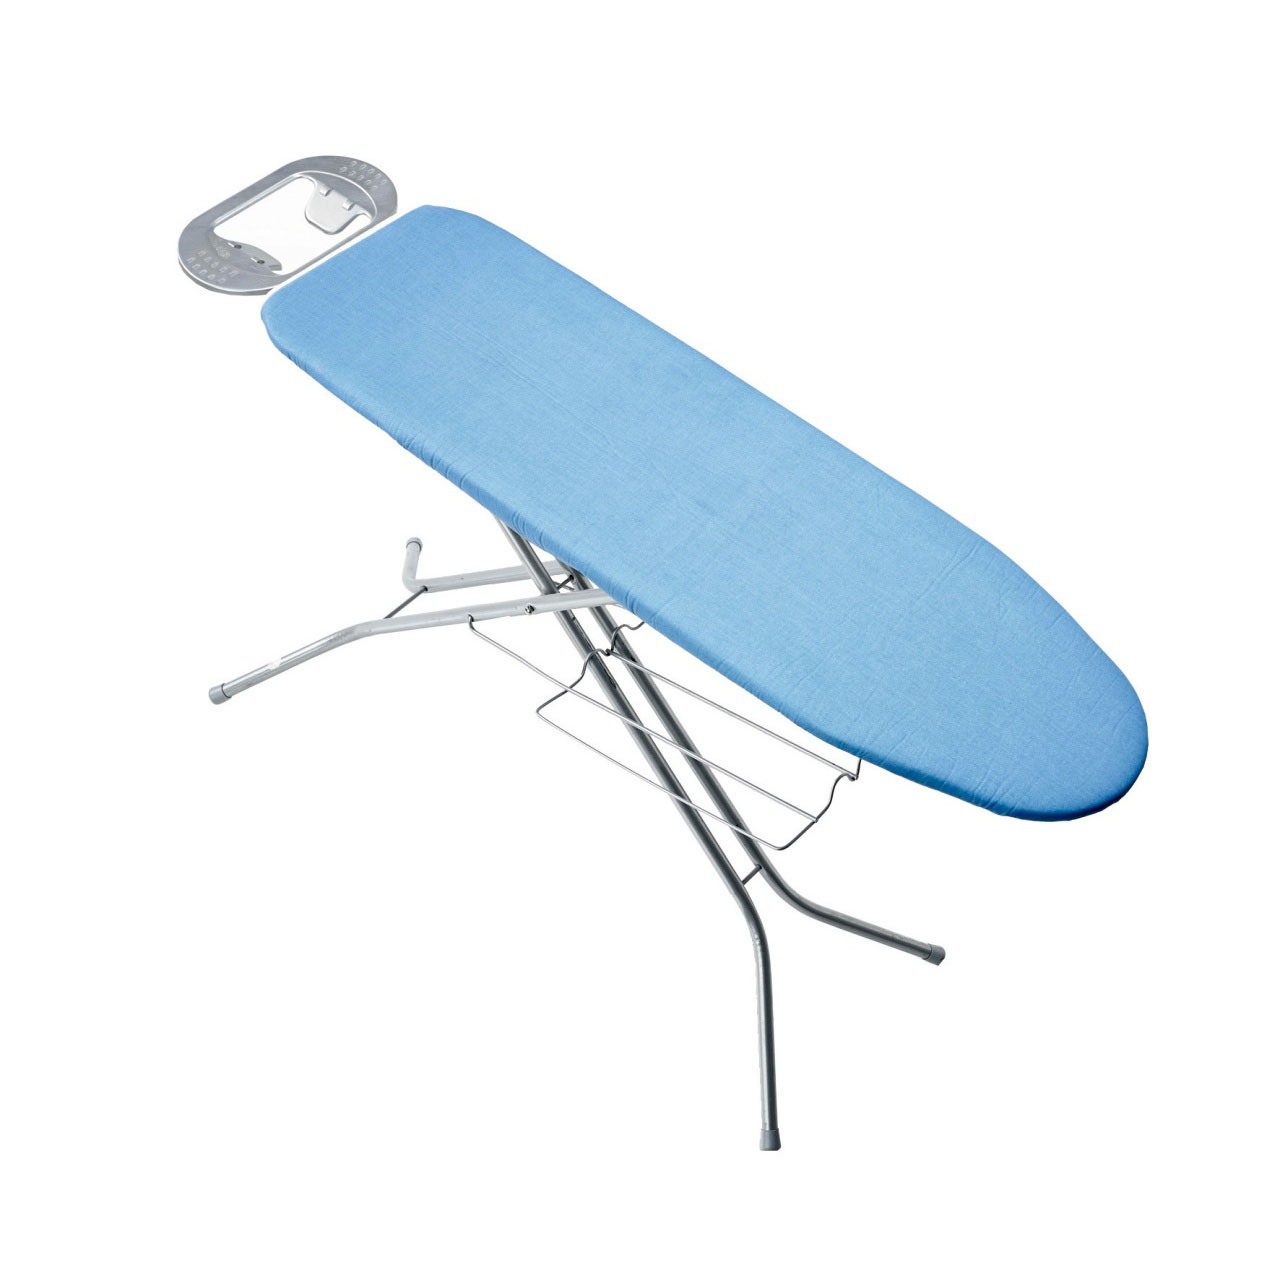 Ceramic Ironing Board Cover